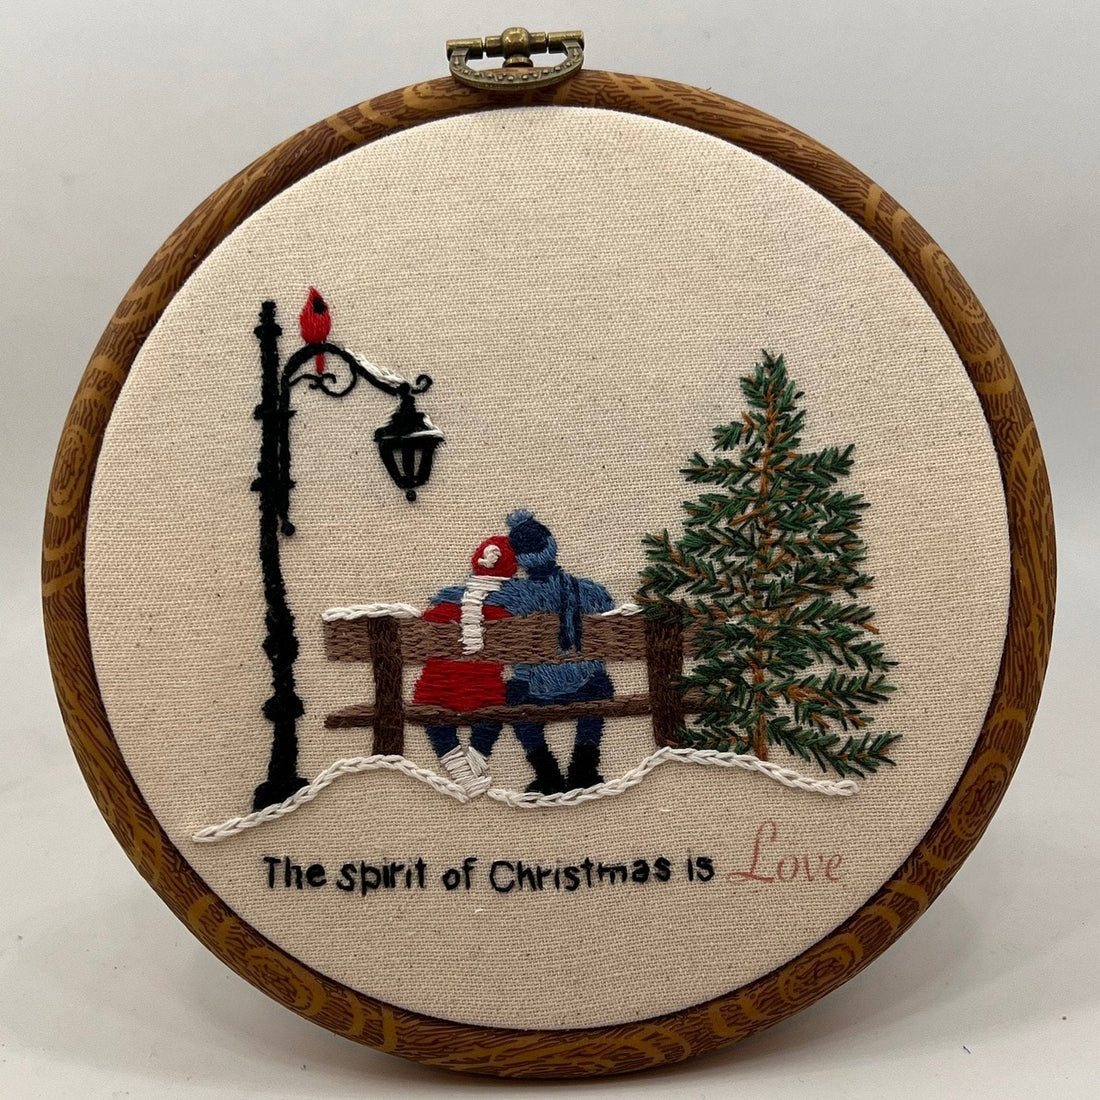 Winter Wonderland Love| Embroidering a Christmas Couple on a Bench